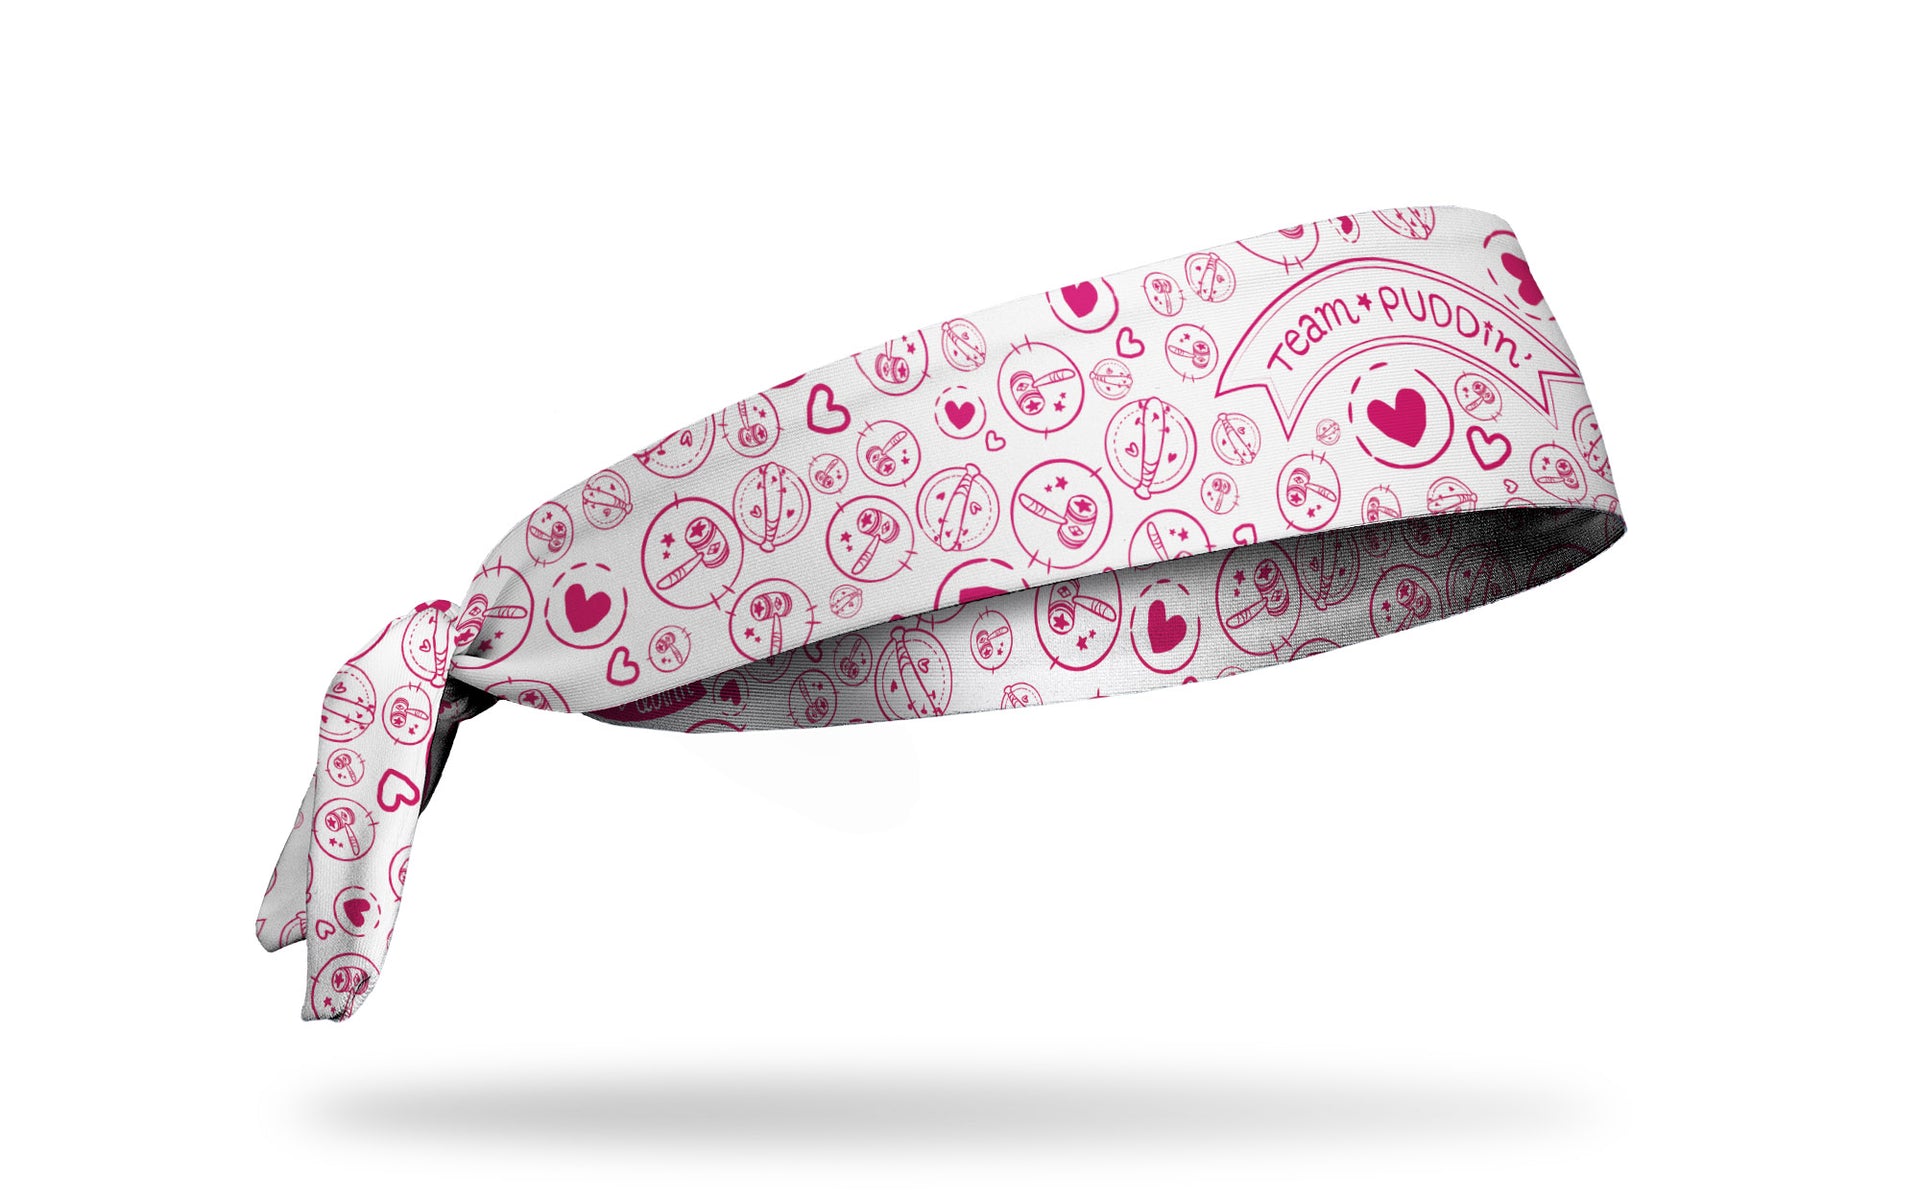 white headband with Harley Quinn Team Puddin' across front and Harley themed doodles in pink